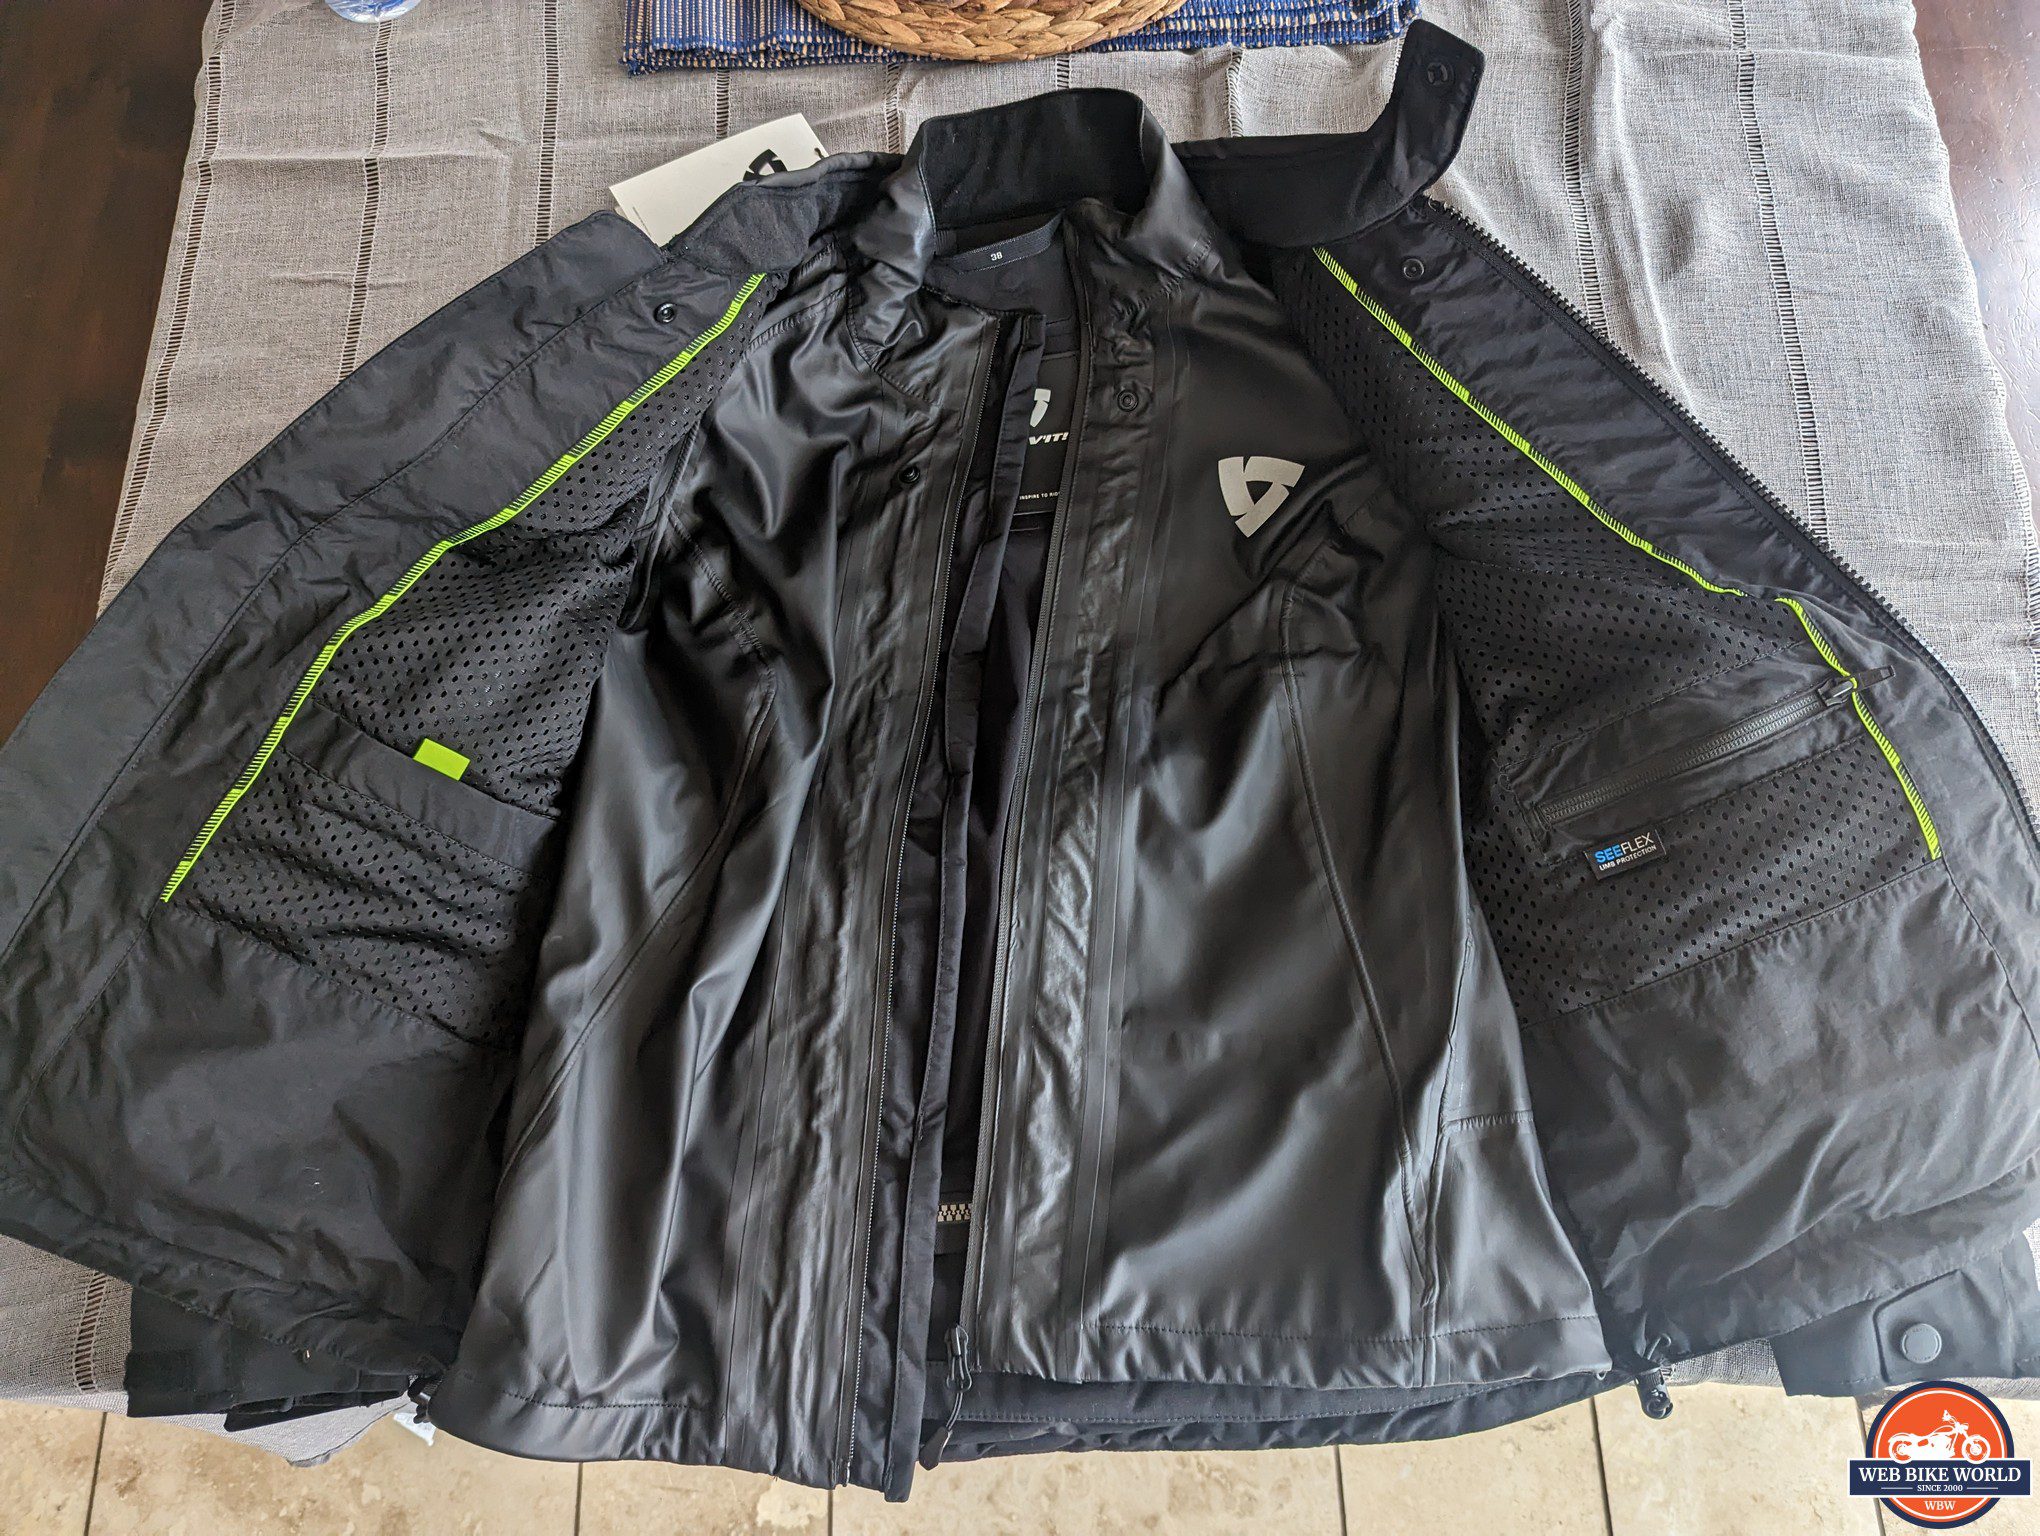 Levante Outer shell unzipped with inner thermal liner.